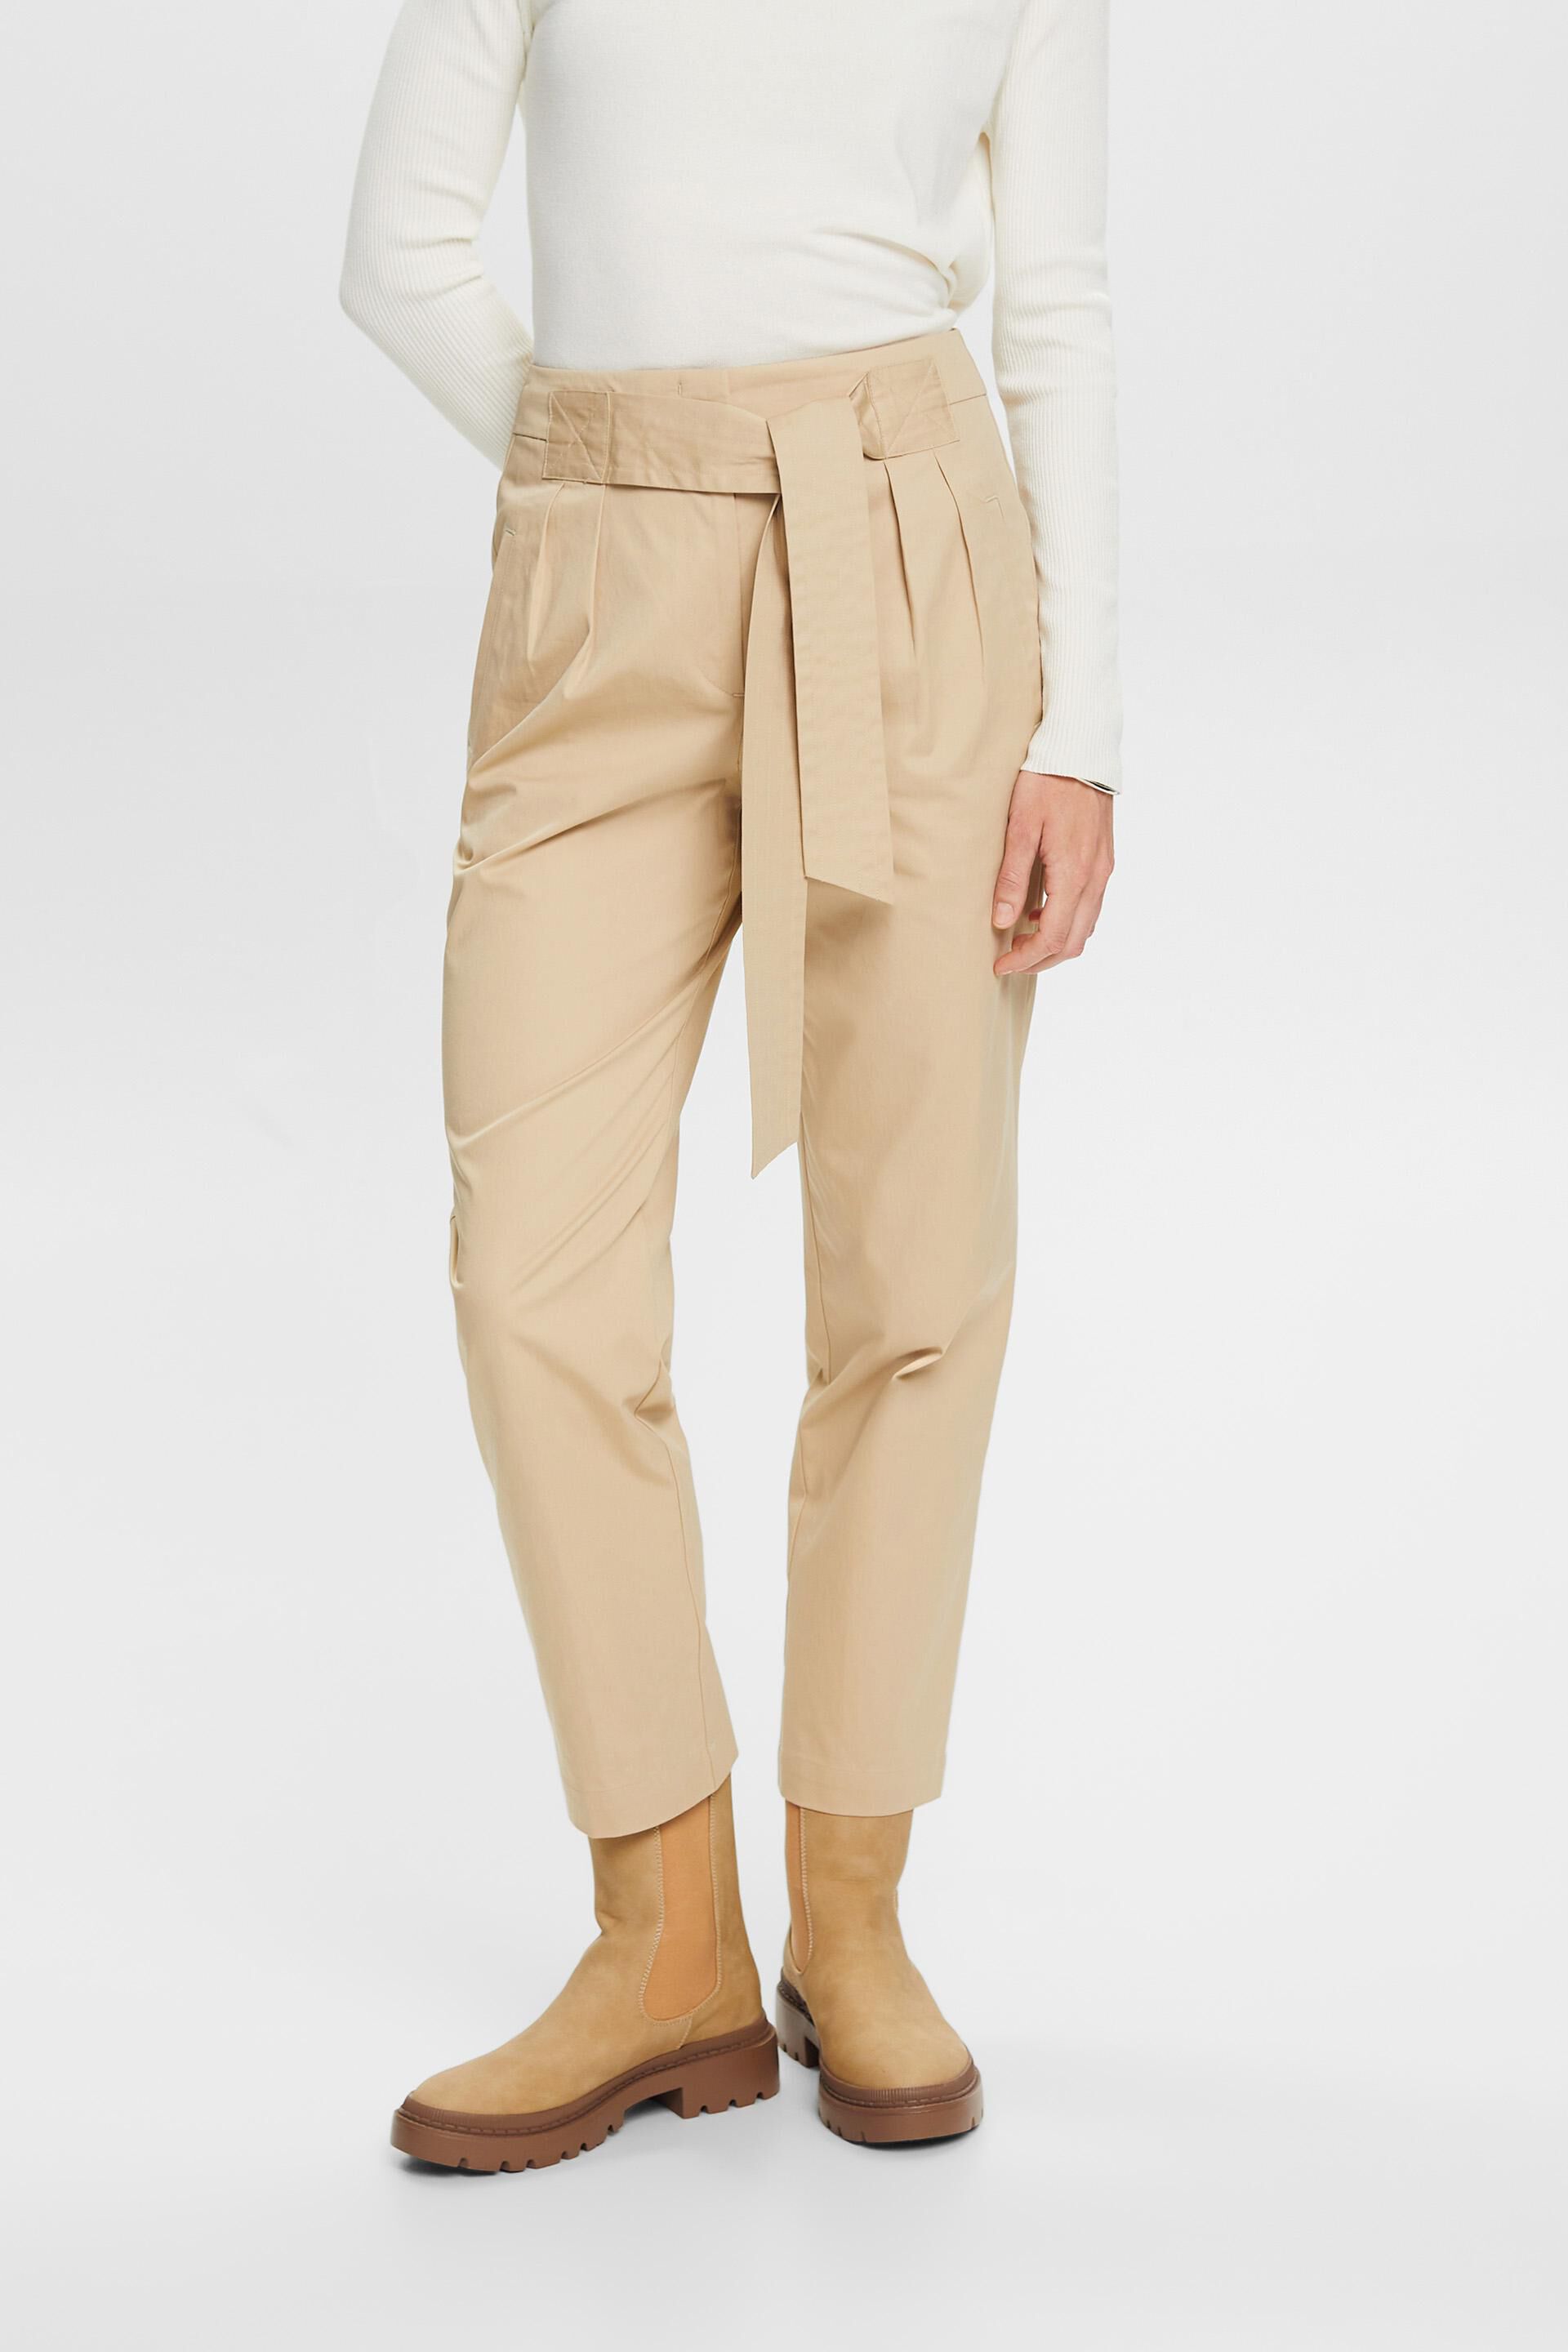 ESPRIT - Chino trousers with a fixed tie belt, 100% cotton at our 